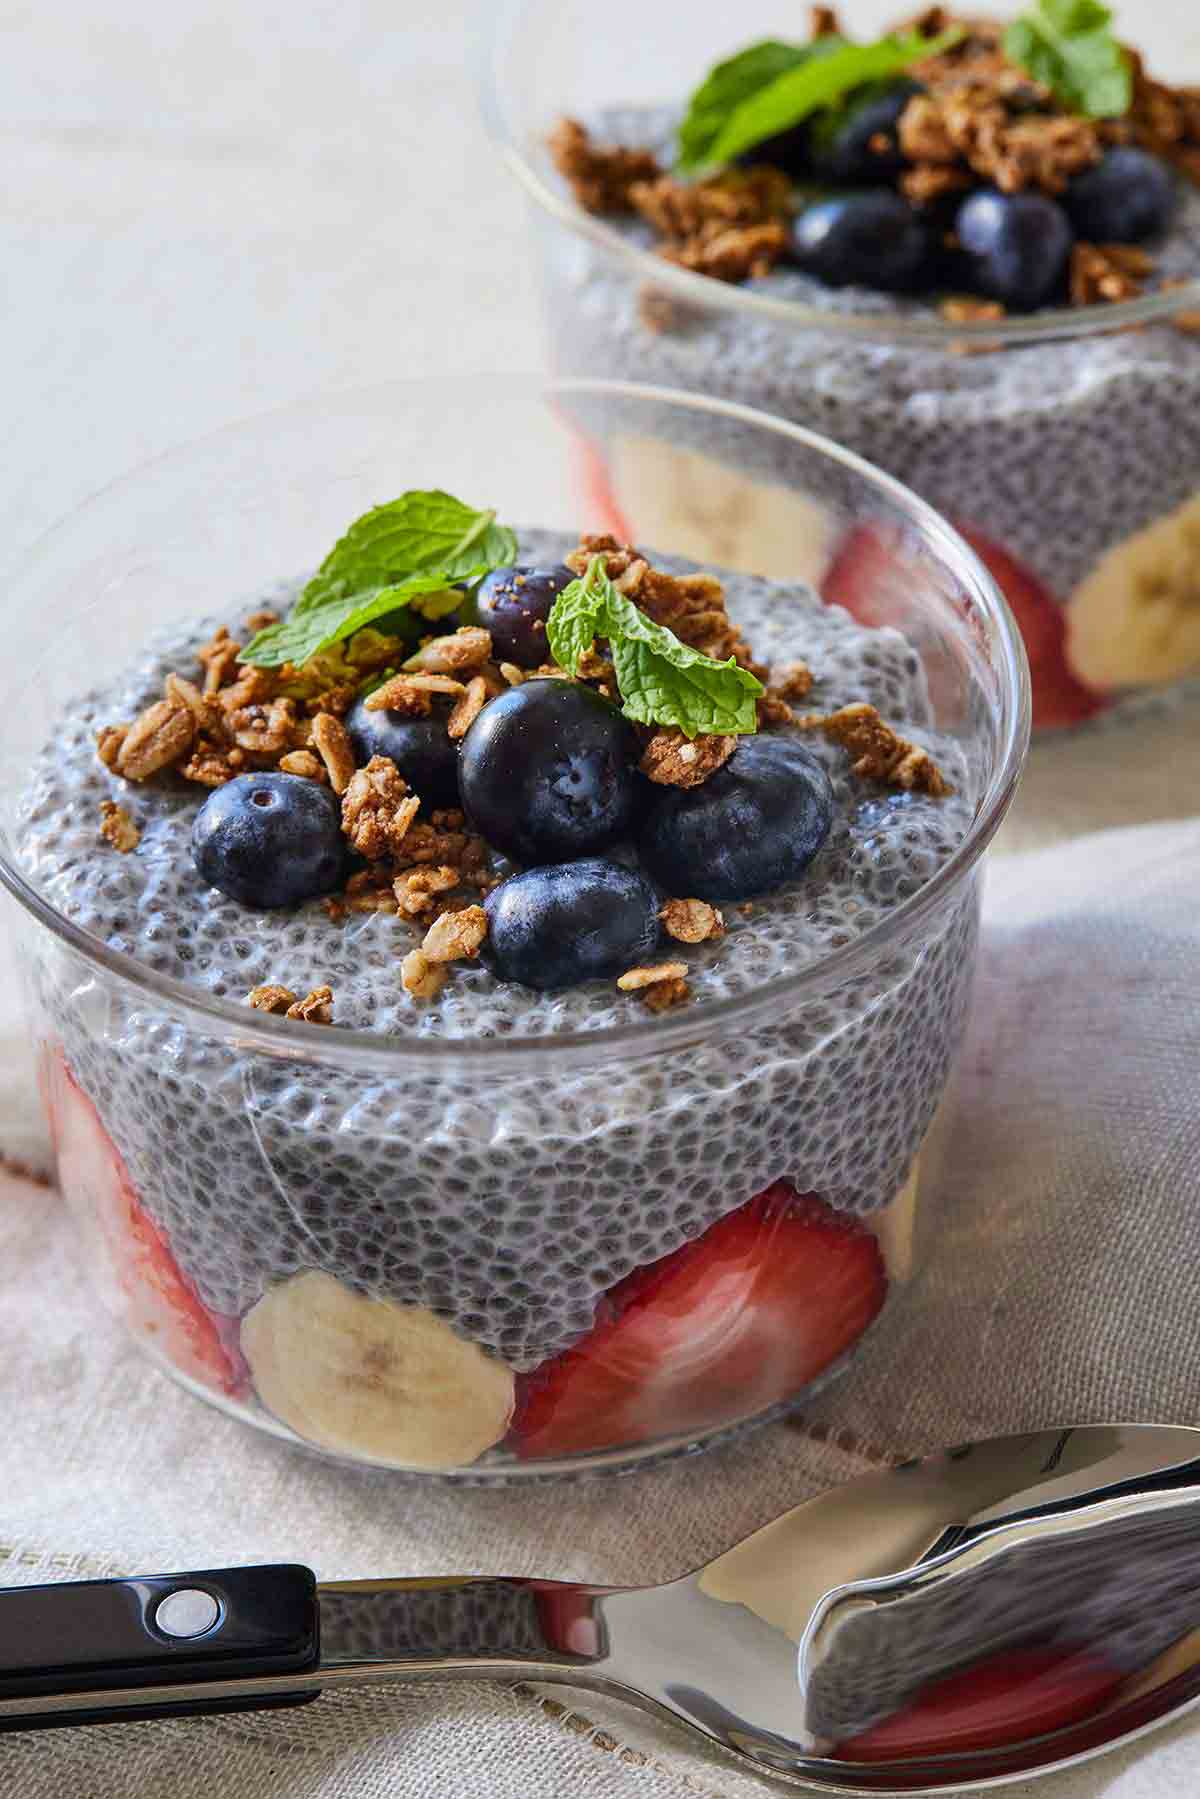 Two small bowls of chia pudding with granola and fresh fruit. A spoon is lying in the front.